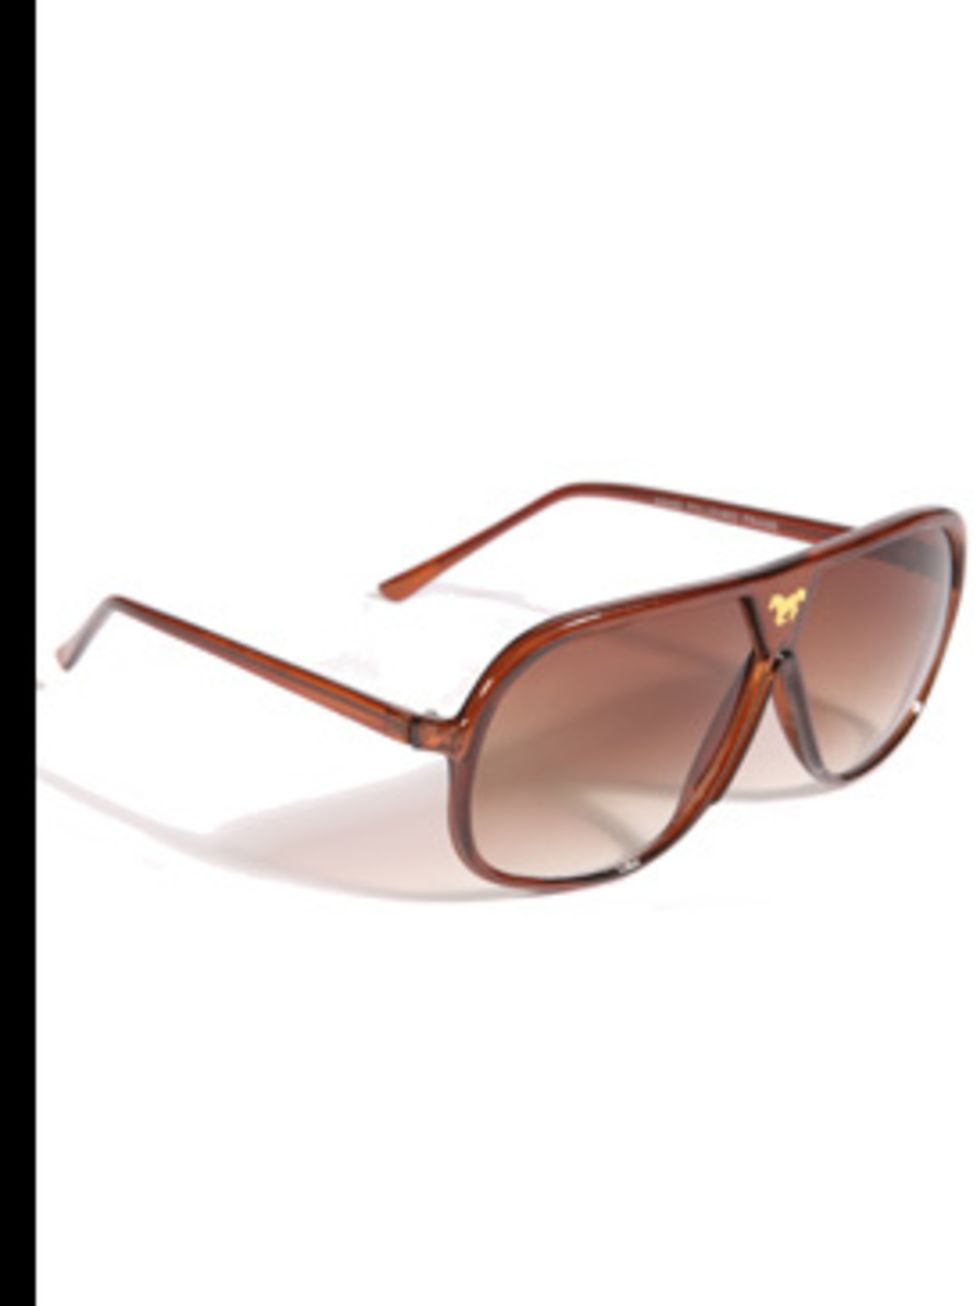 <p>Aviators, £16, by <a href="http://www.urbanoutfitters.co.uk/Accessories/Sunglasses/icat/wsunglasses&amp;bklist=icat,5,shop,womens,womensaccessories,wsunglasses">Urban Outfitters</a></p>